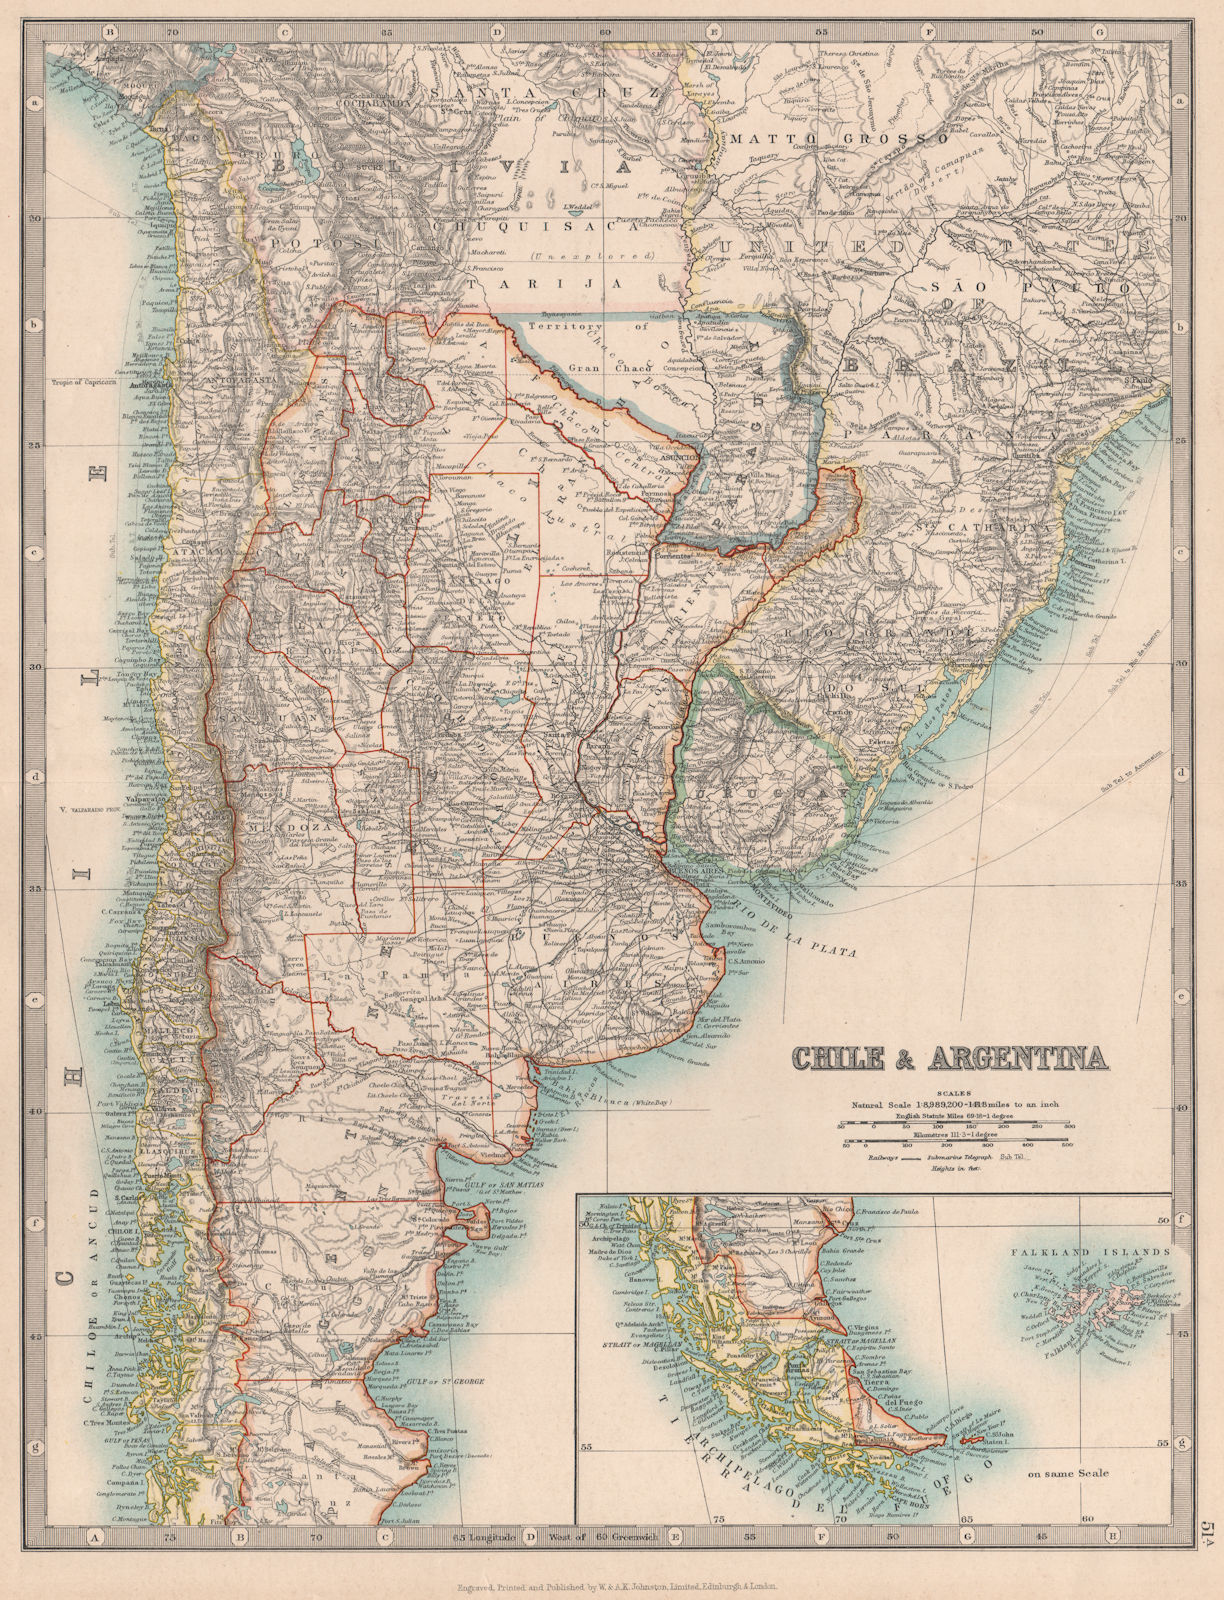 Associate Product CHILE & ARGENTINA. Paraguay including Gran Chaco. Uruguay. JOHNSTON 1912 map